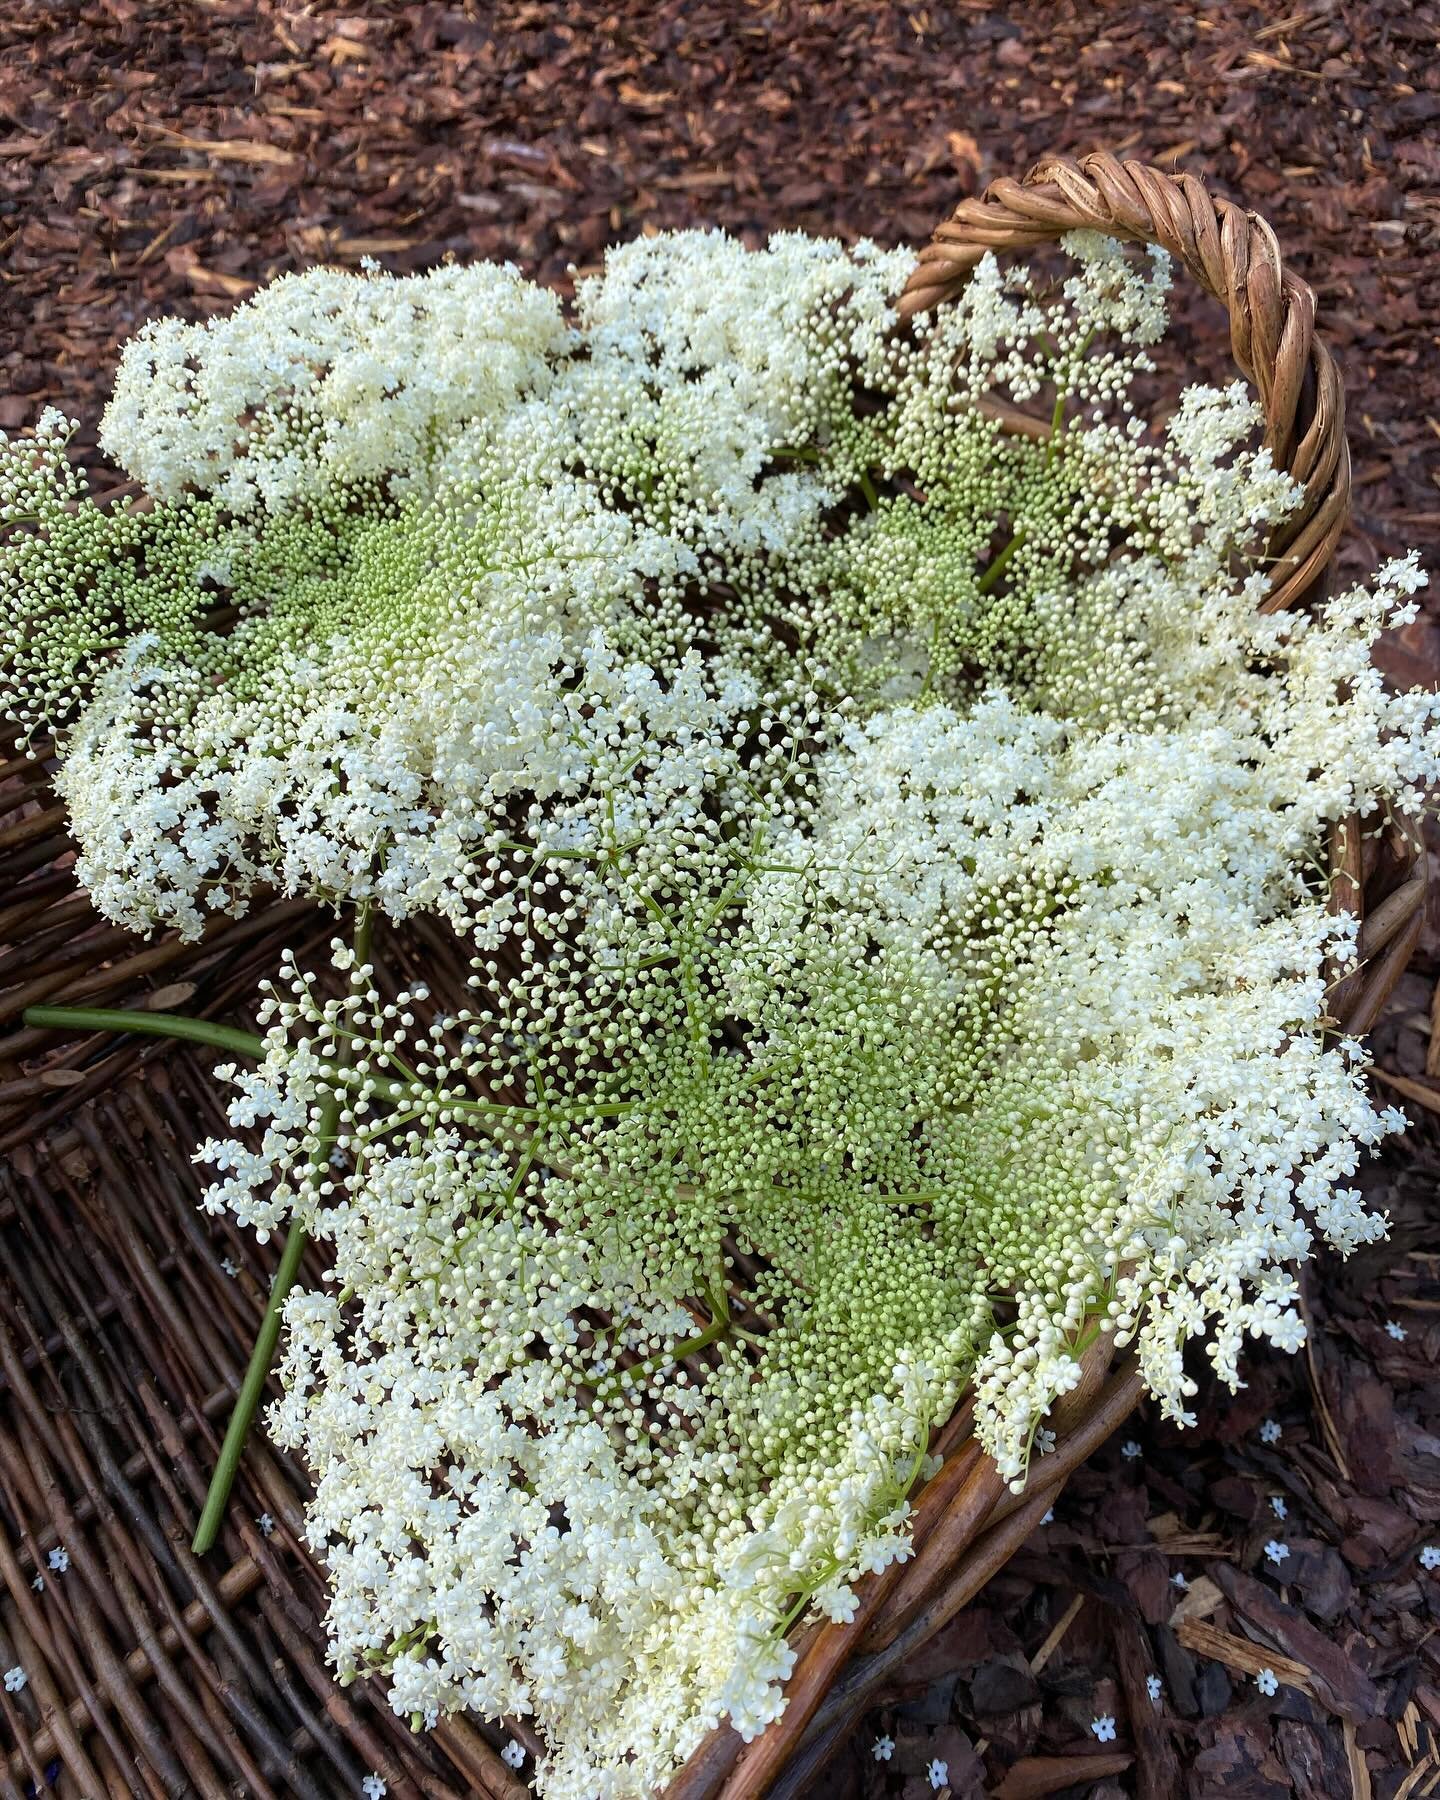 Today as a special treat at the shop we will have fresh elderflower tea for sale, while it lasts.

Native to most regions in the US, elderberry is easy to grow. Pay attention to the roadsides around here and you will see them beginning to bloom.

Thi